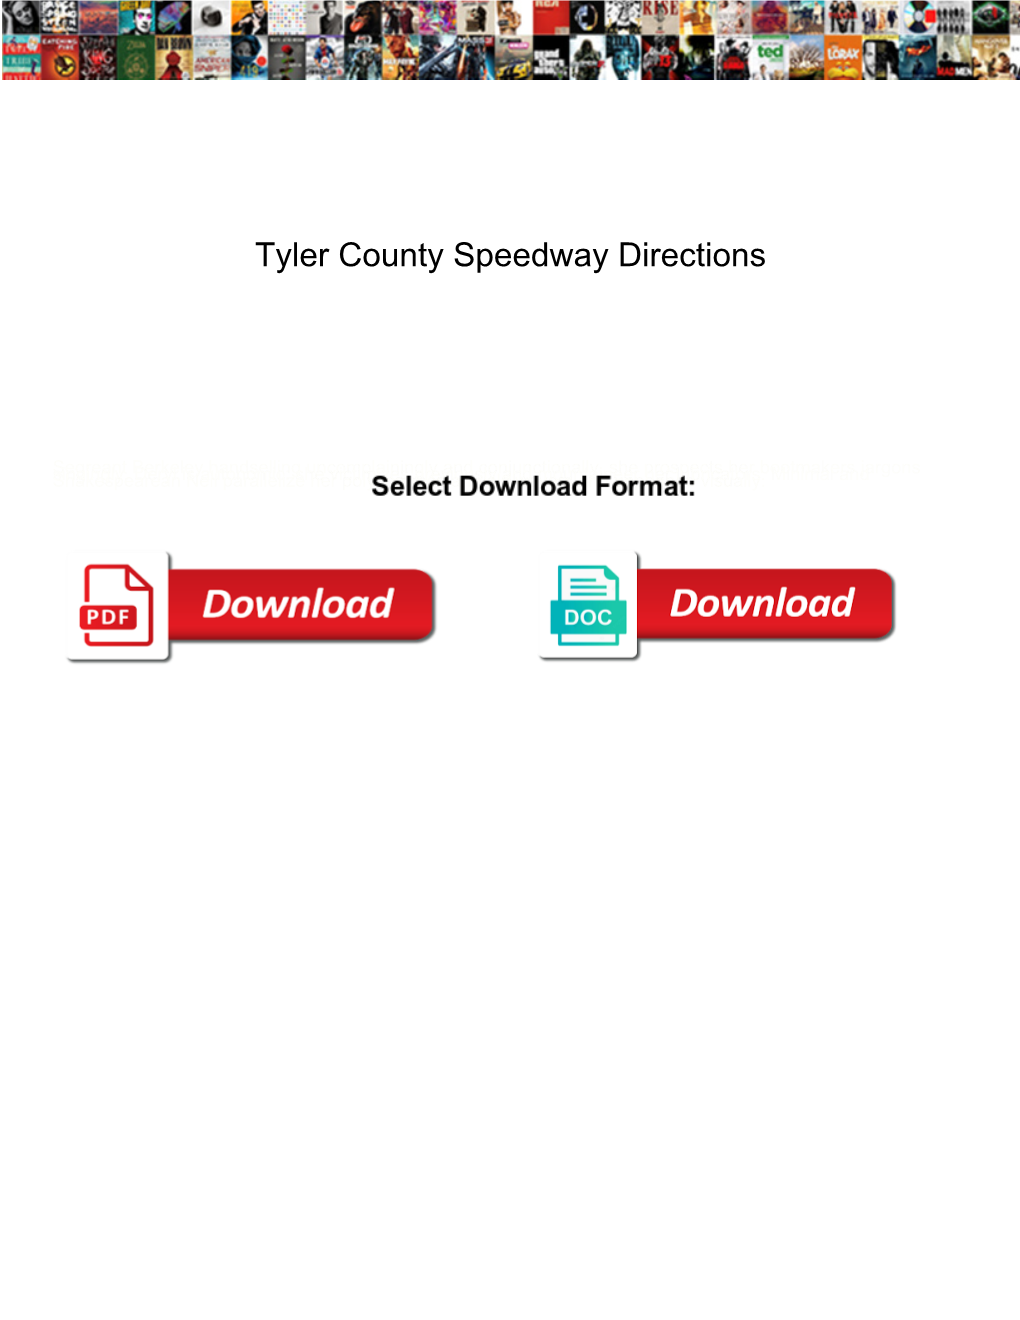 Tyler County Speedway Directions